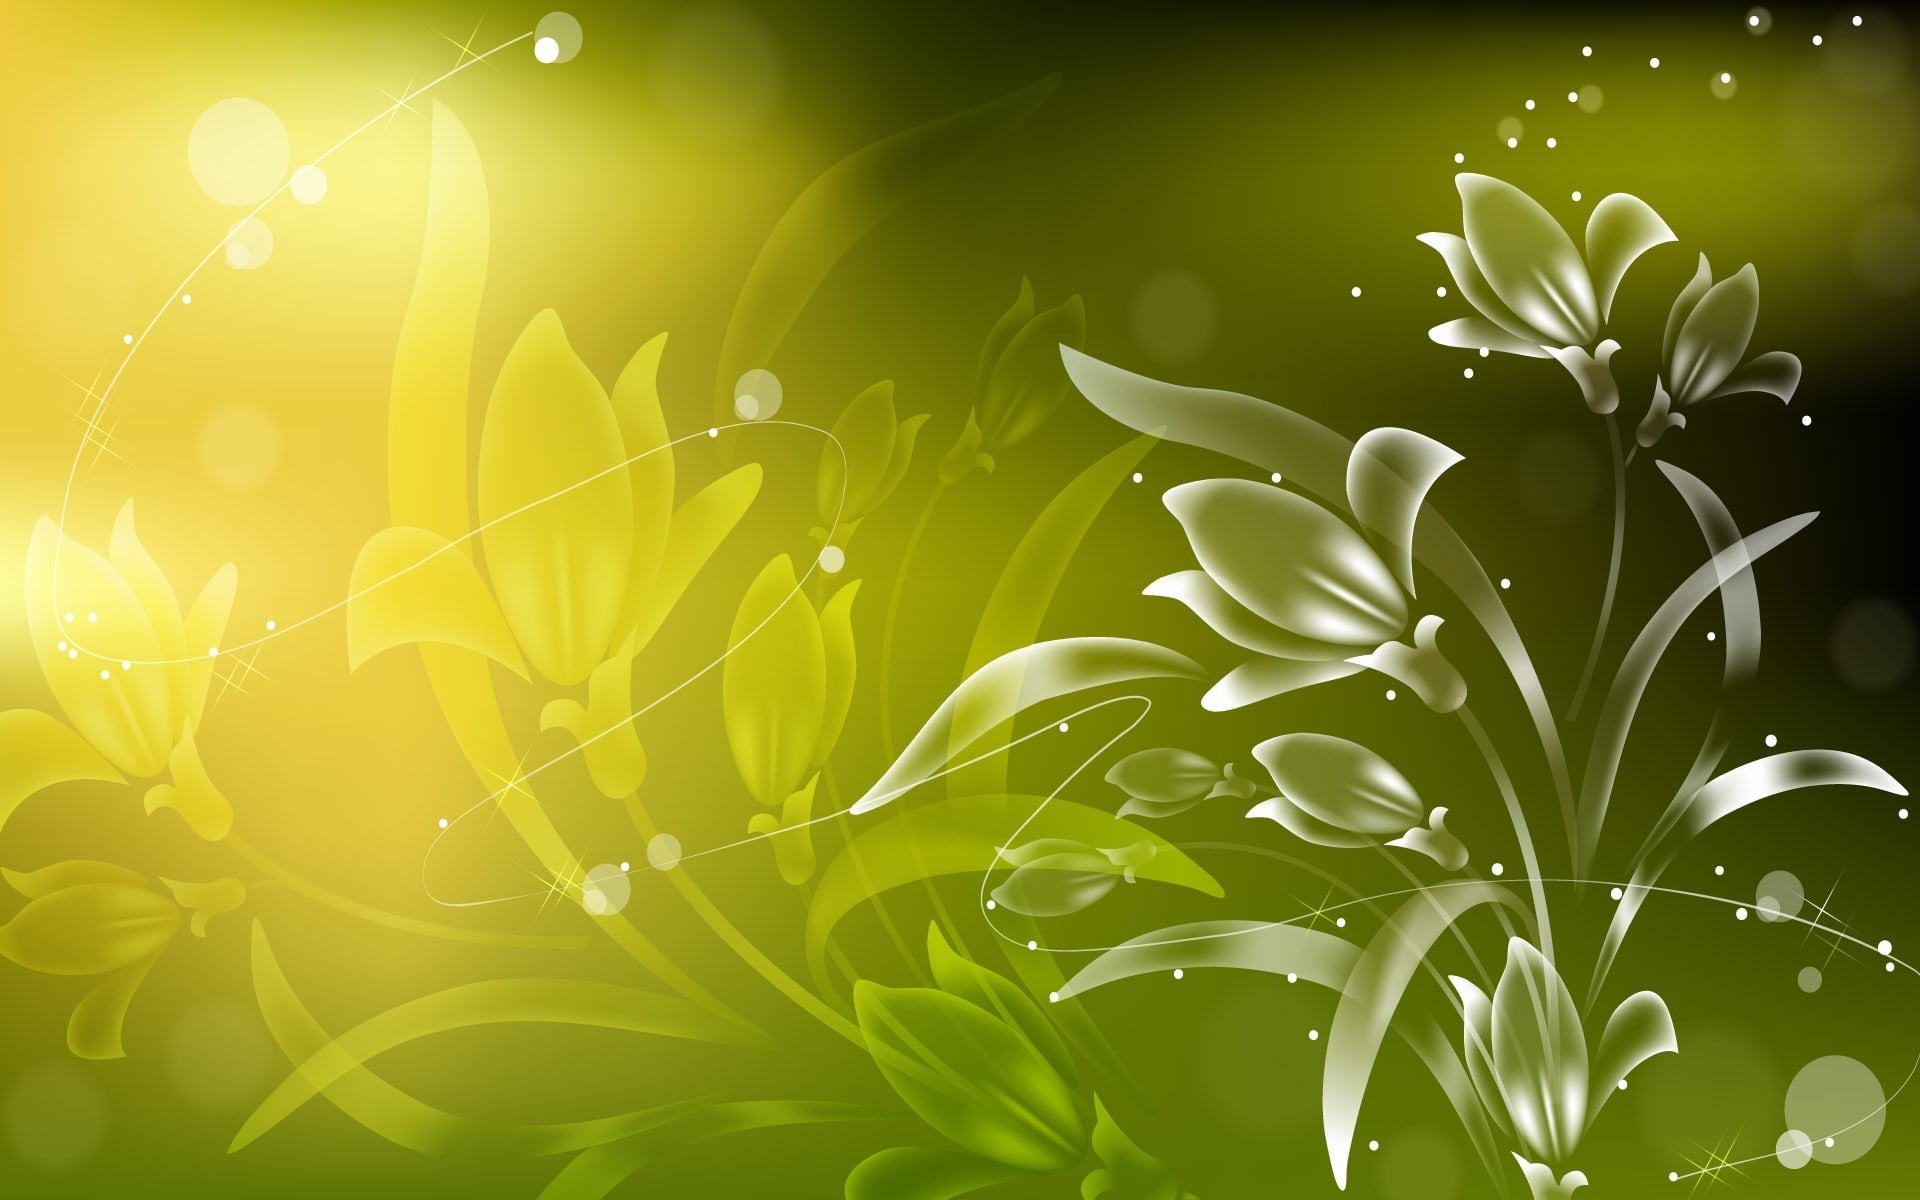 white, yellow, and green floral illustration, digital art, flowers